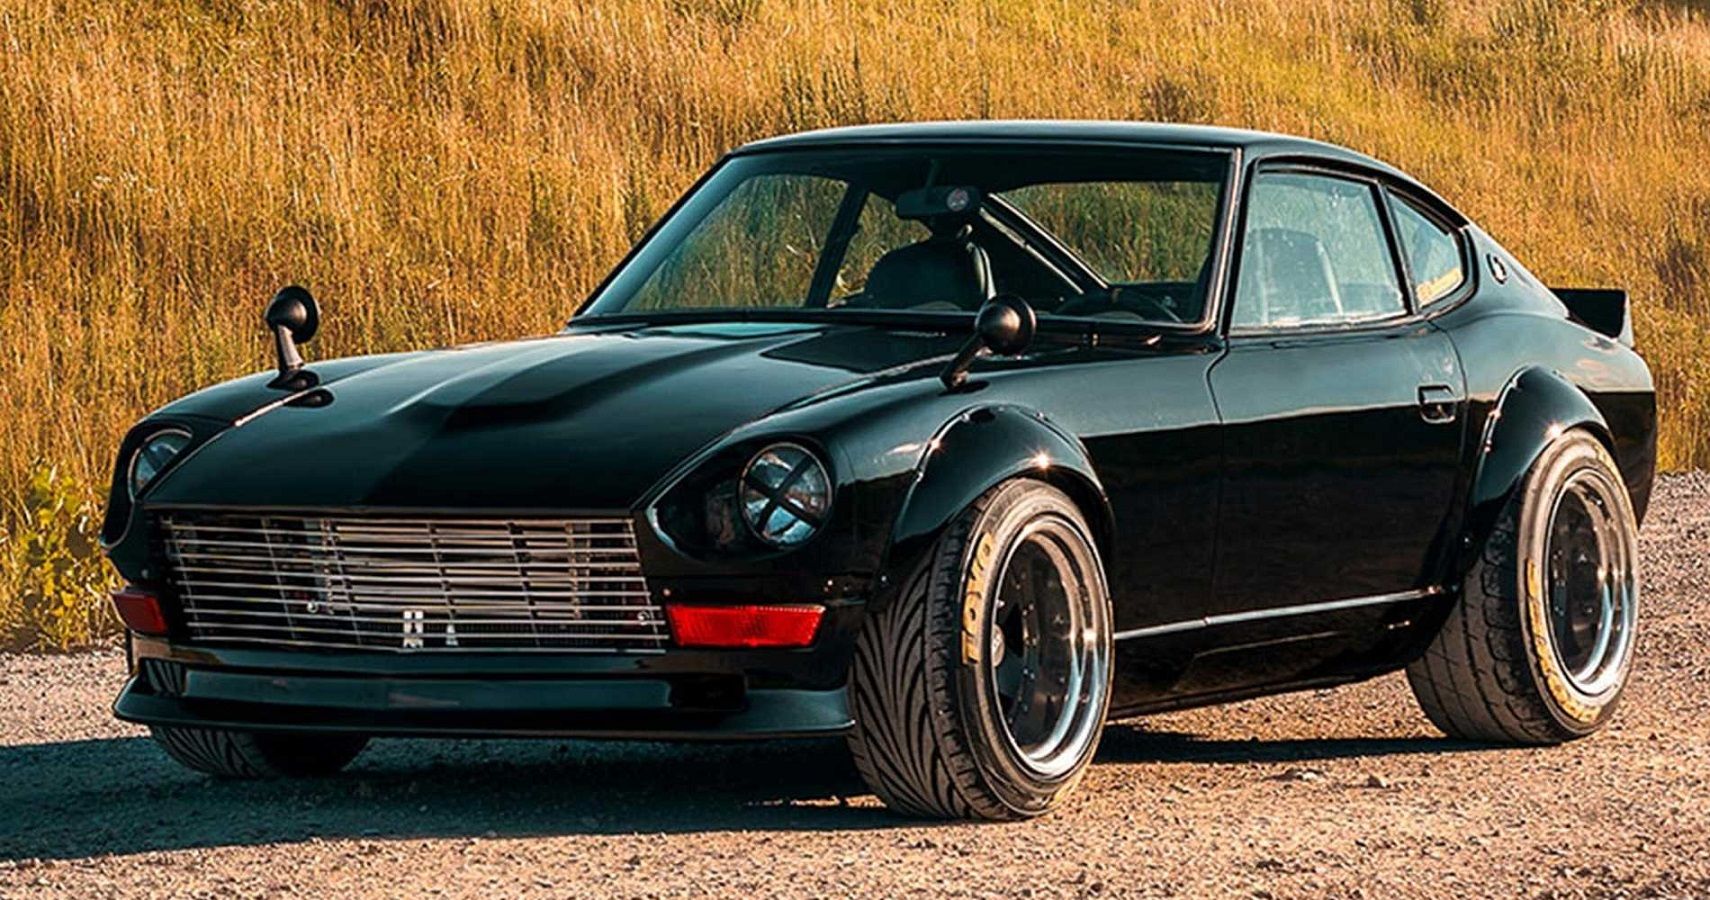 Black Datsun 240Z in front of yellow grass